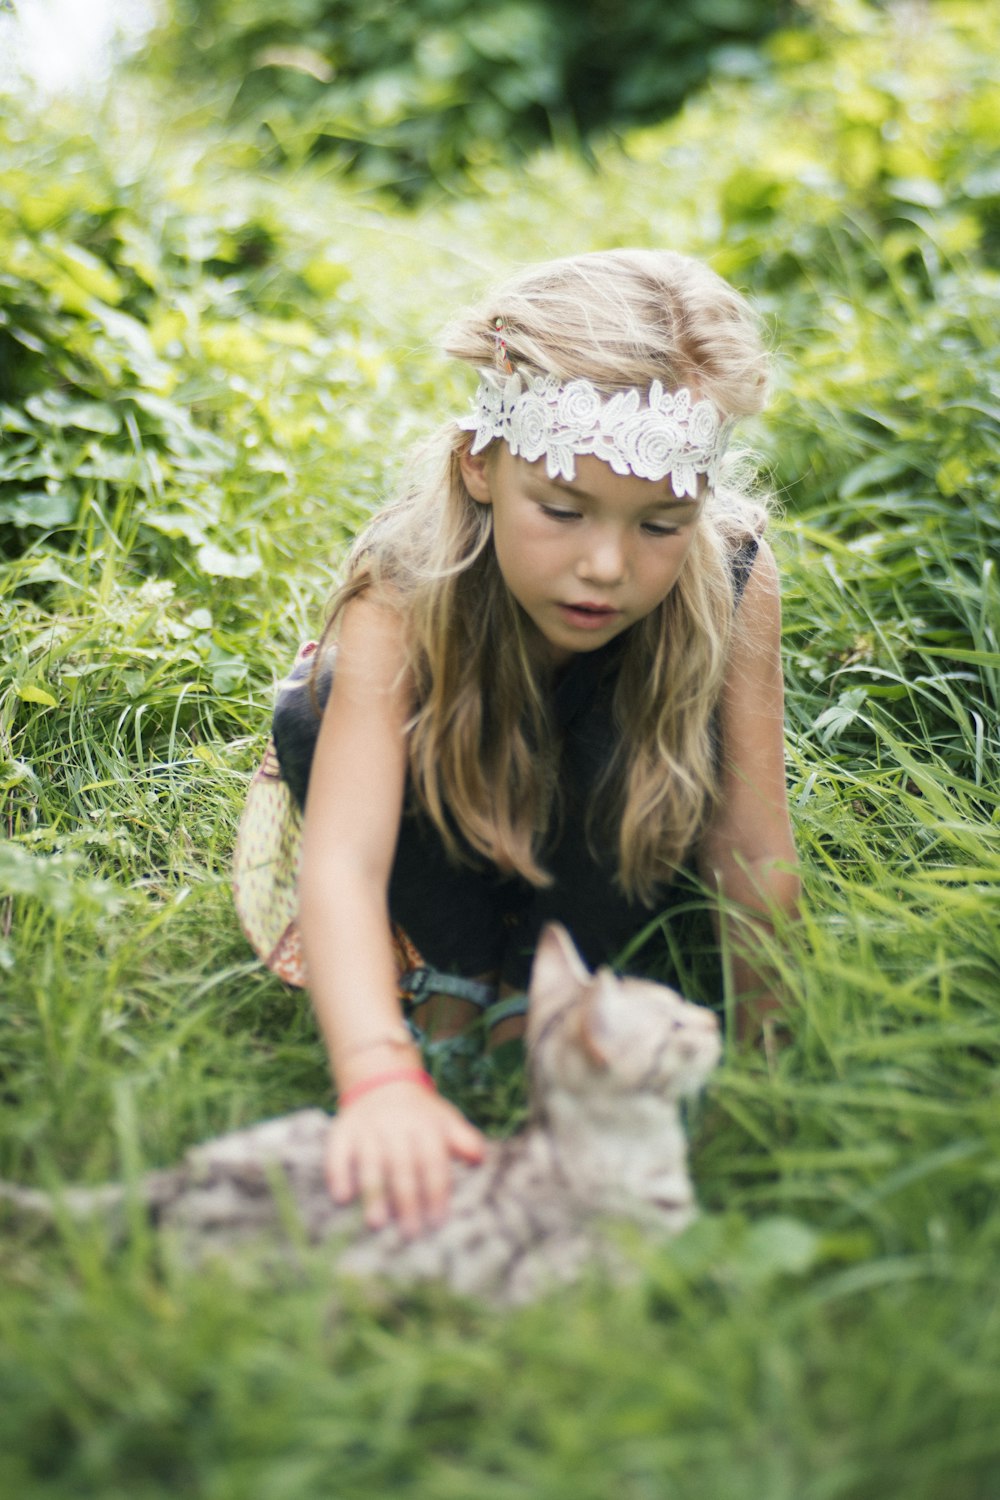 girl patting a cat lying in the grass